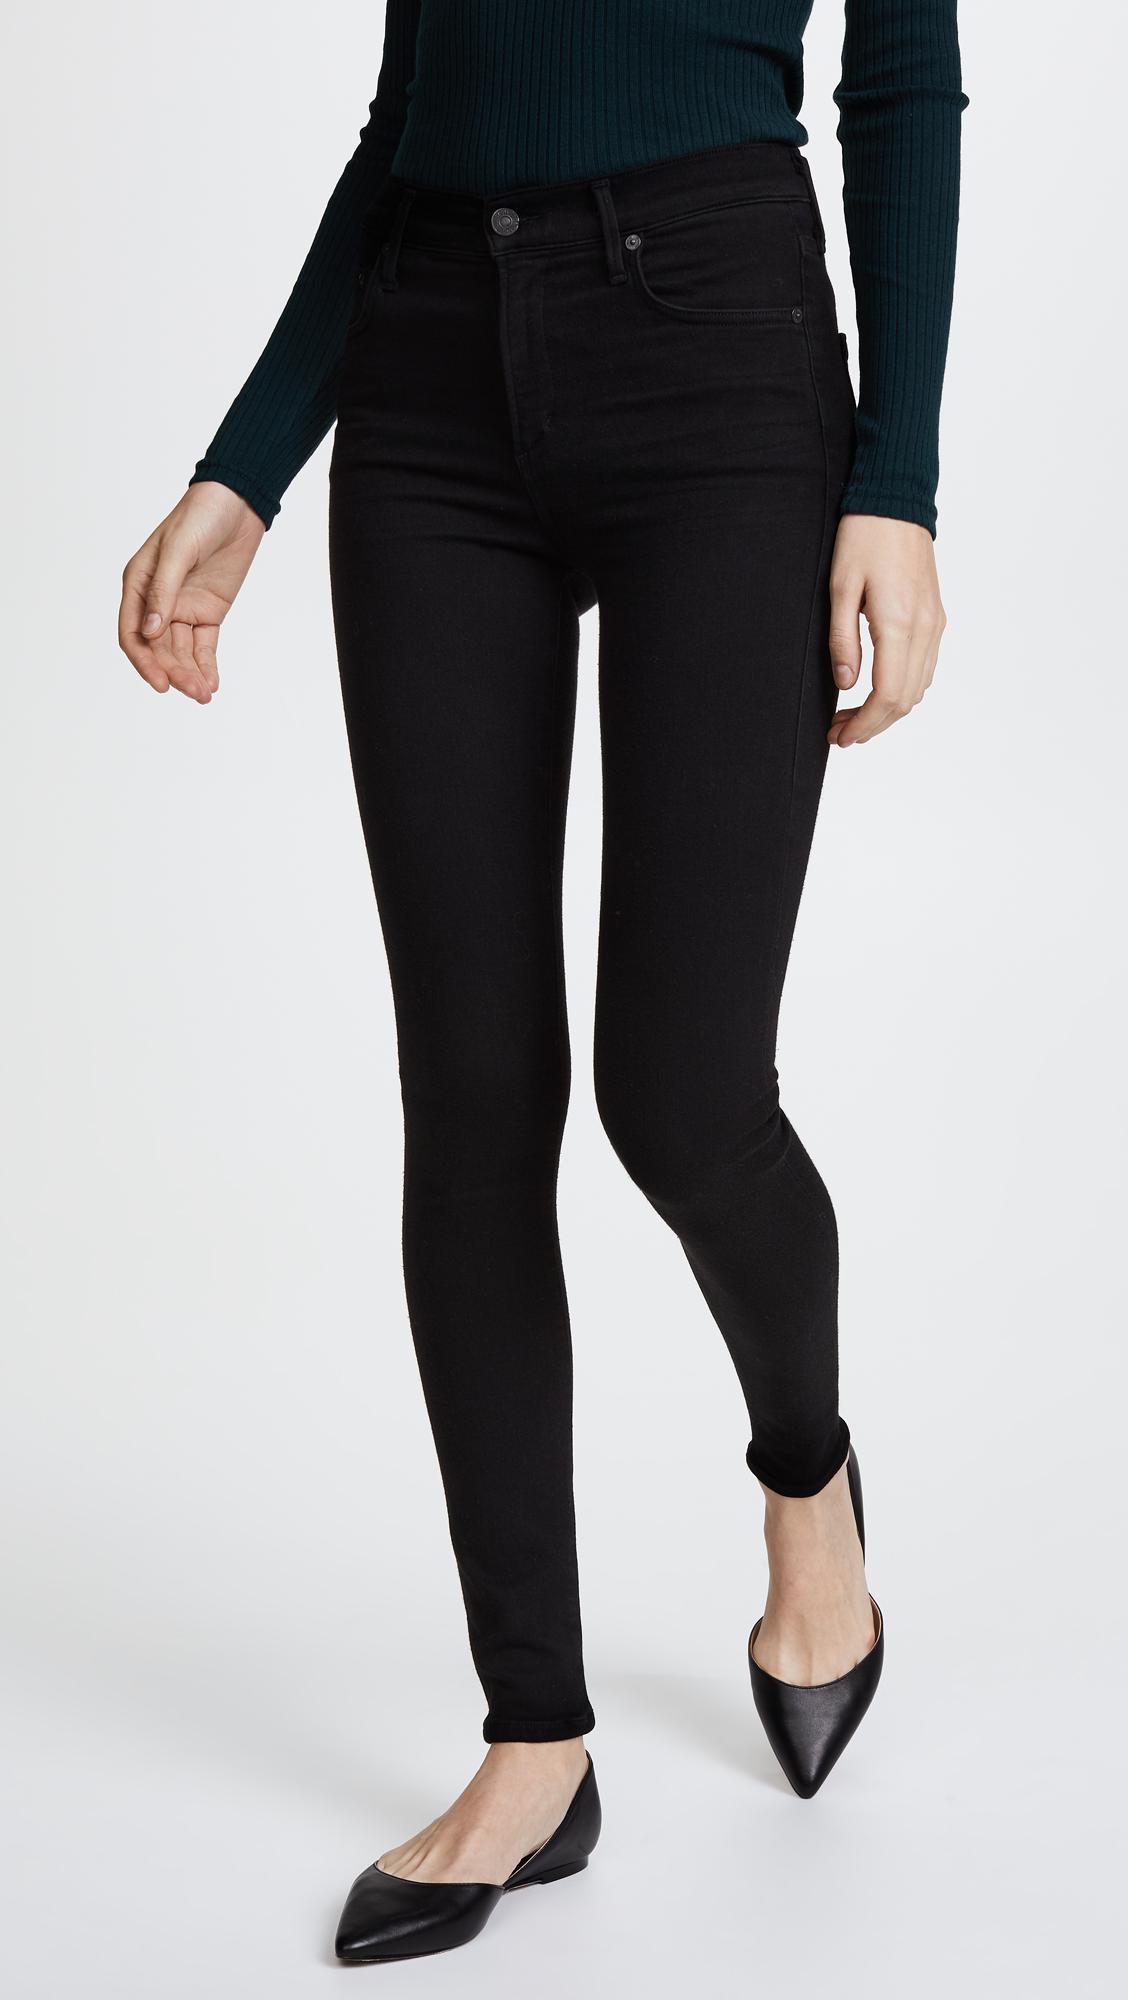 Lyst - Citizens Of Humanity Rocket High Rise Skinny Jeans in Black ...